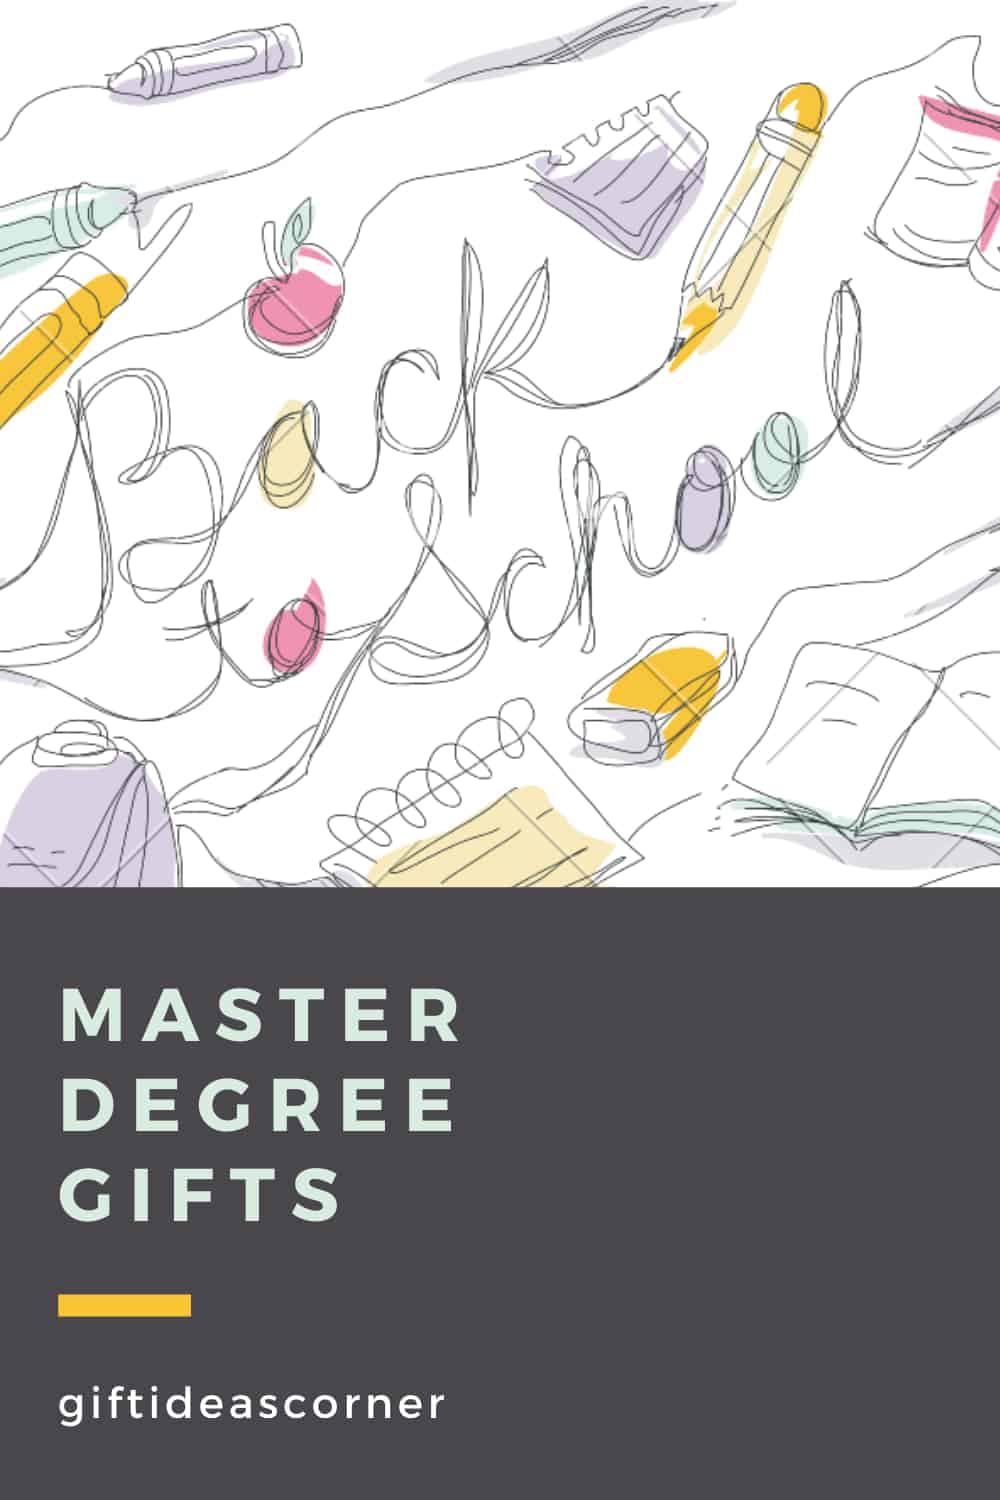 masters degree gifts 2